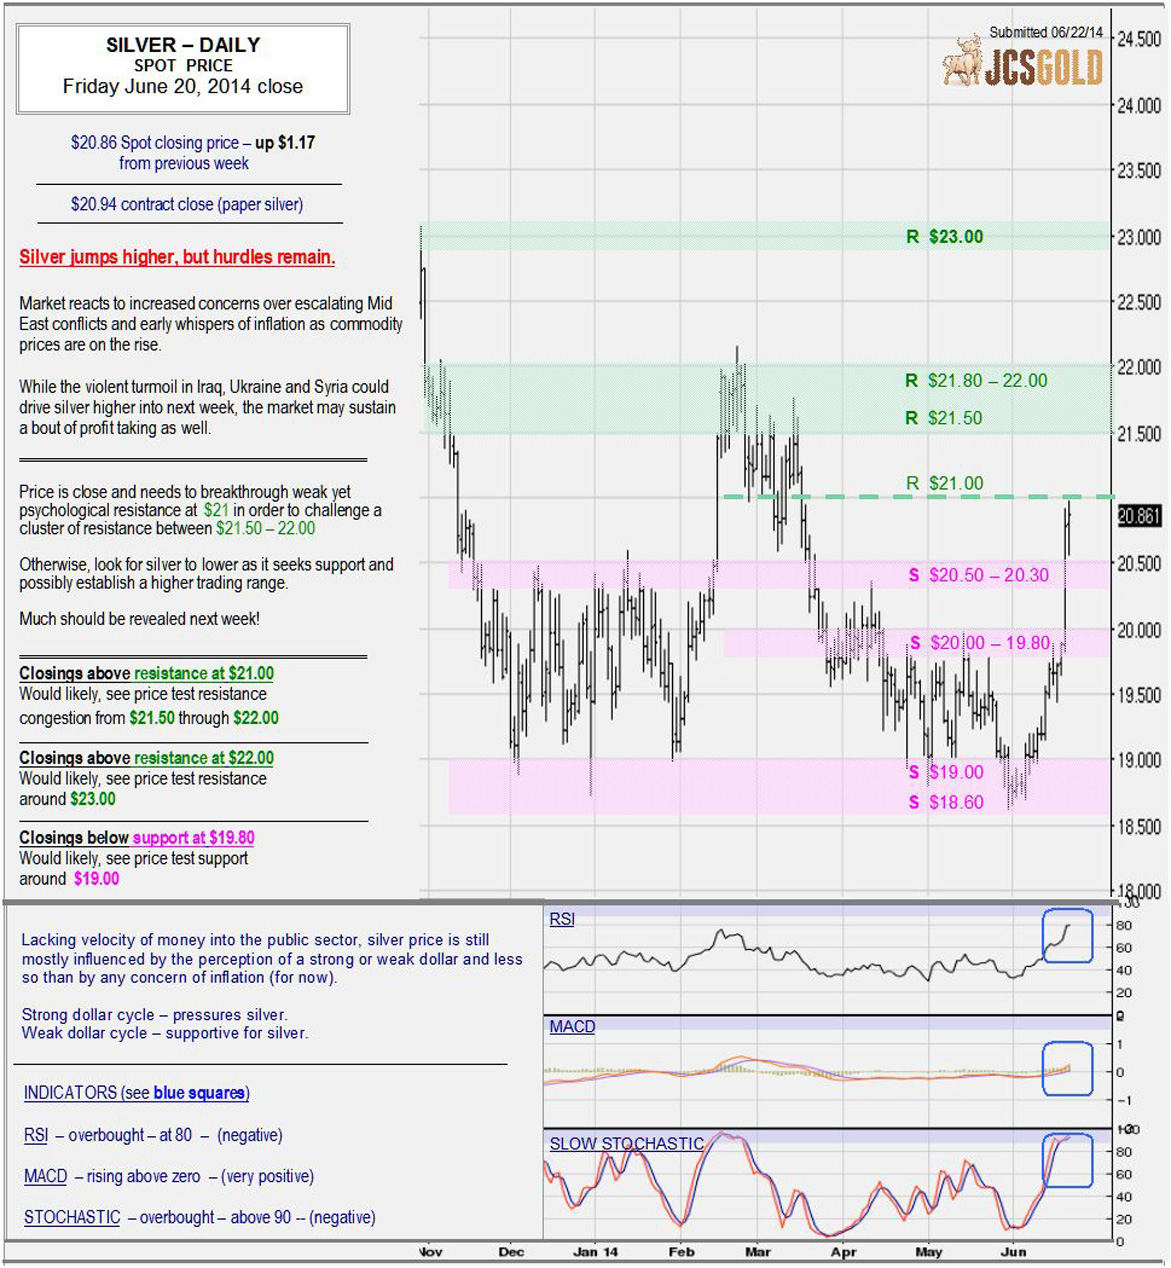 June 20, 2014 chart & commentary